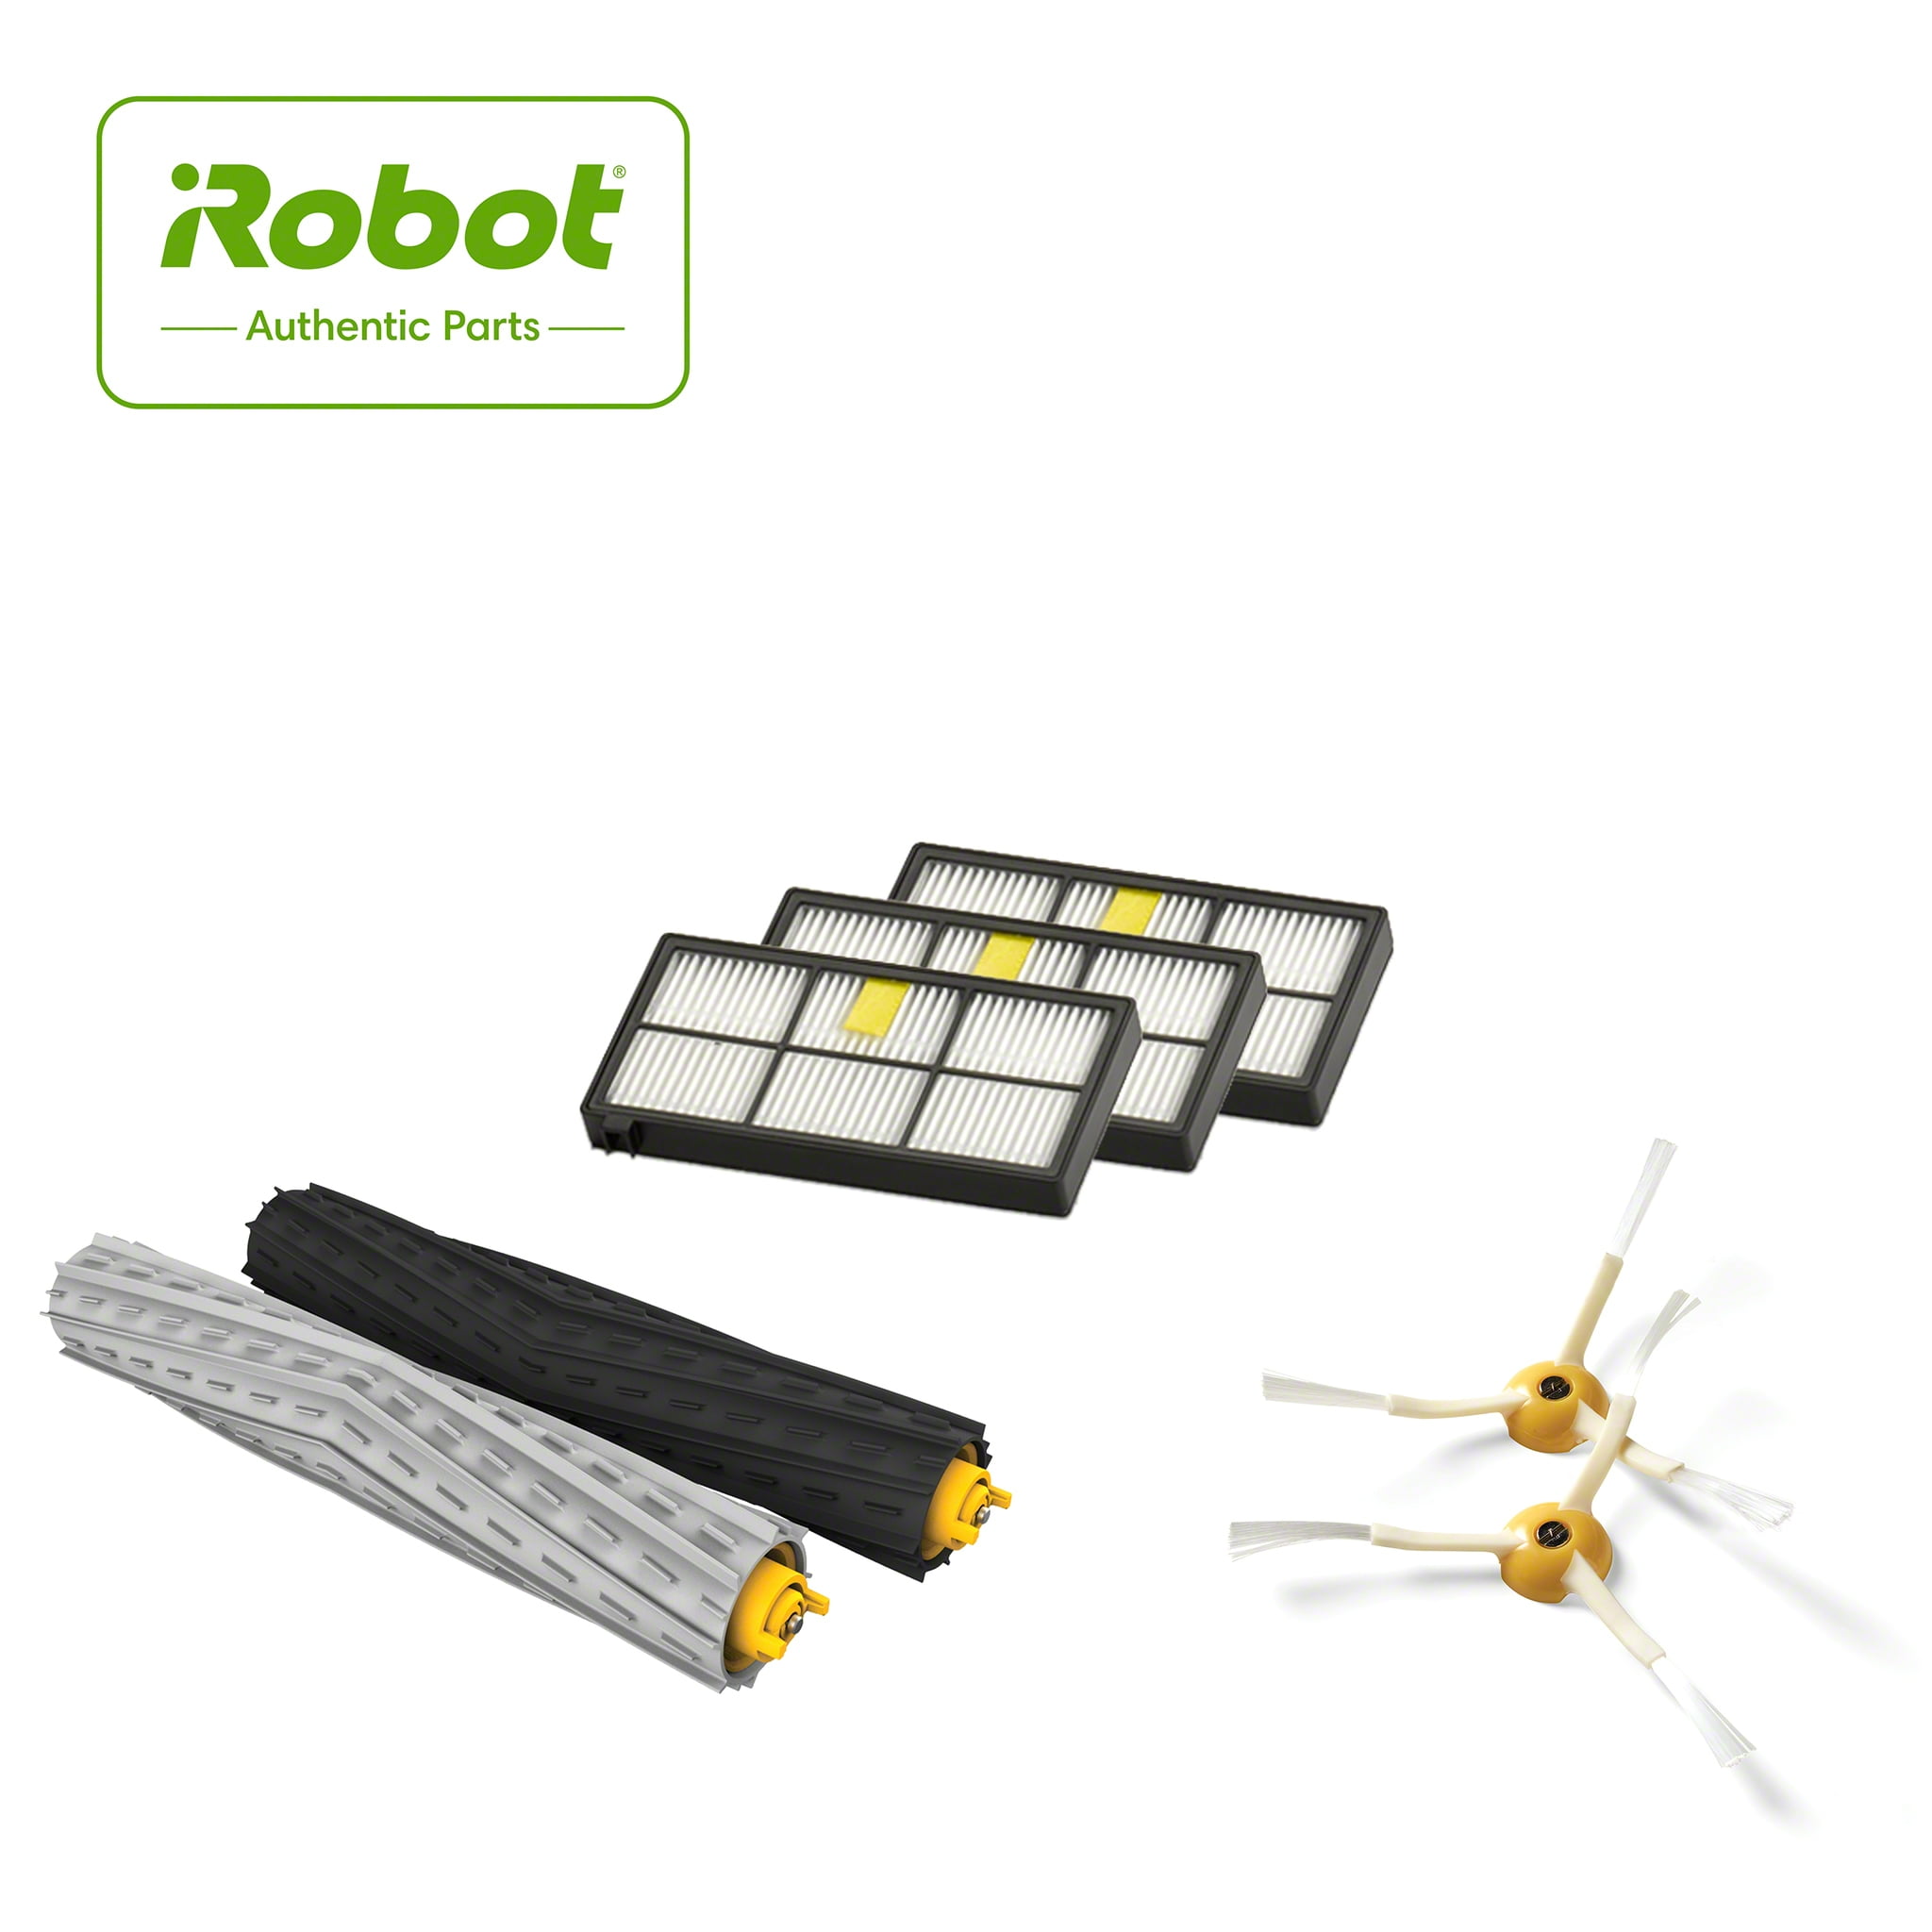 iRobot Authentic Replacement Parts- Roomba 800 and 900 Series Replenishment  Kit (3 AeroForce Filters, 2 Spinning Side Brushes, and 1 Set of  Multi-Surface Rubber Brushes) 